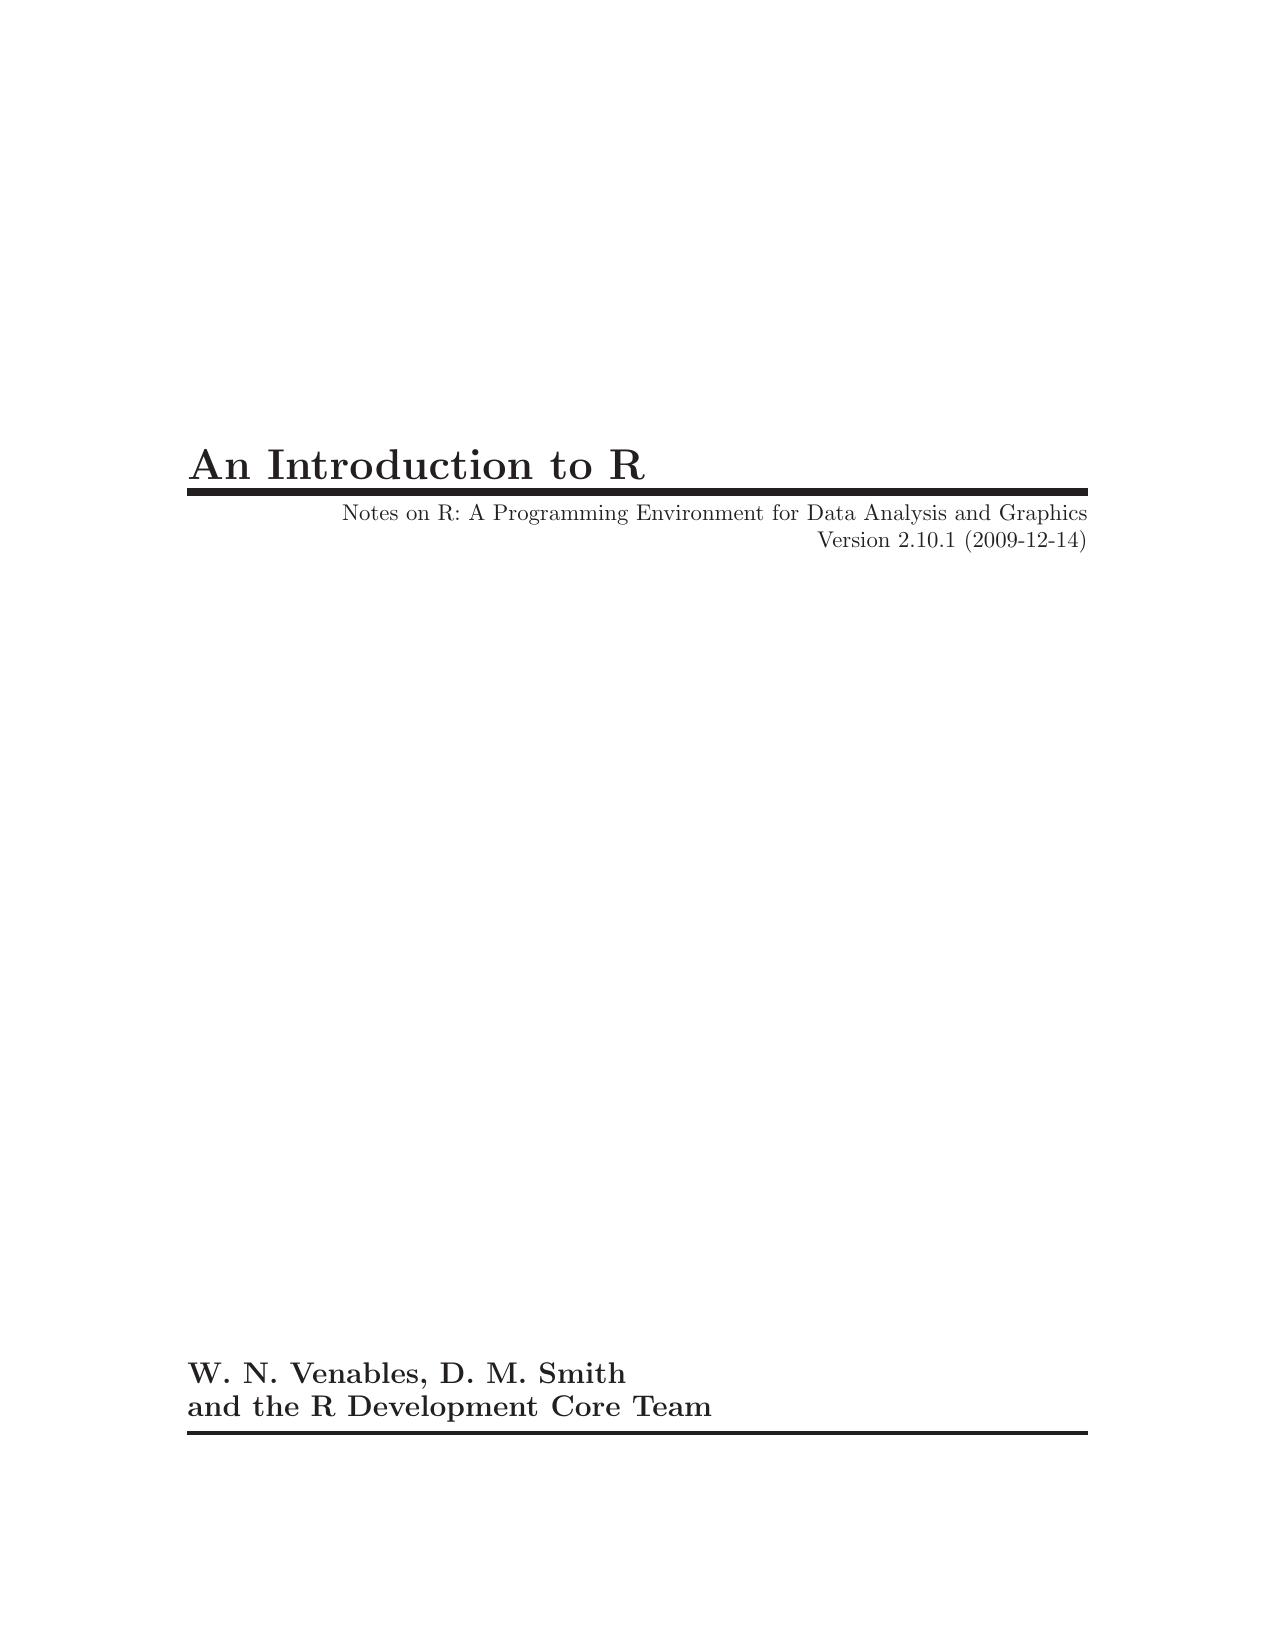 An Introduction to R 1999.pdf